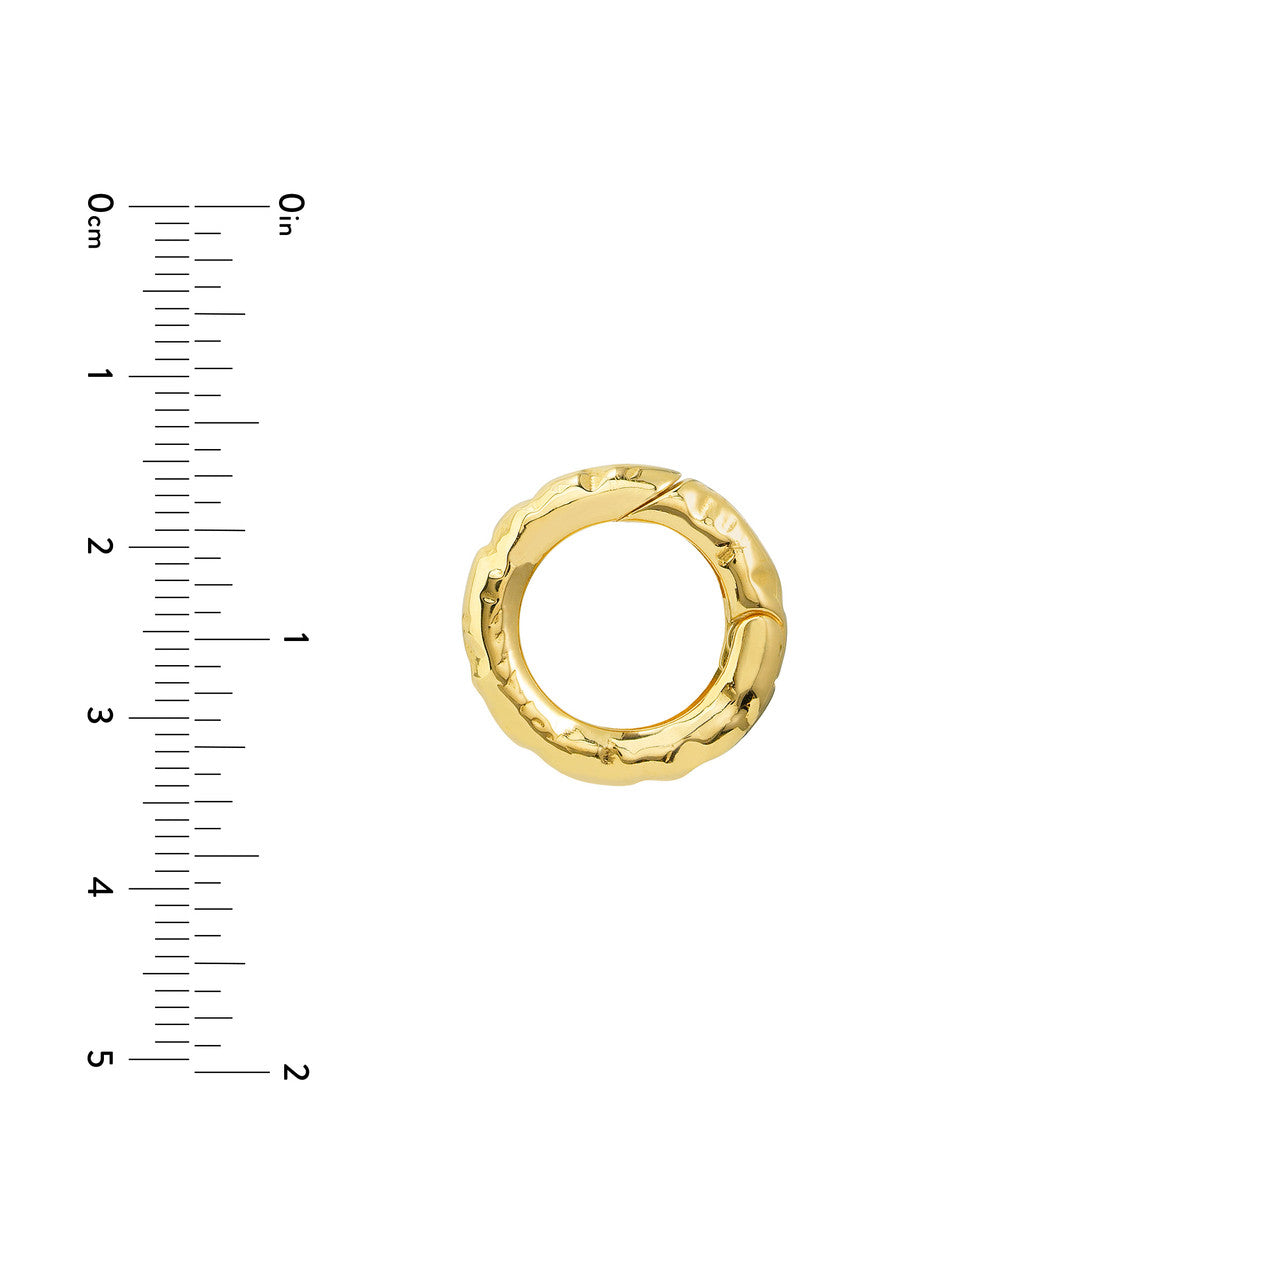 14K Yellow Gold 19.5mm Round Hammered Push Clasp Lock Connector Enhancer Hanger for Pendants Charms Bracelets Anklets Necklaces